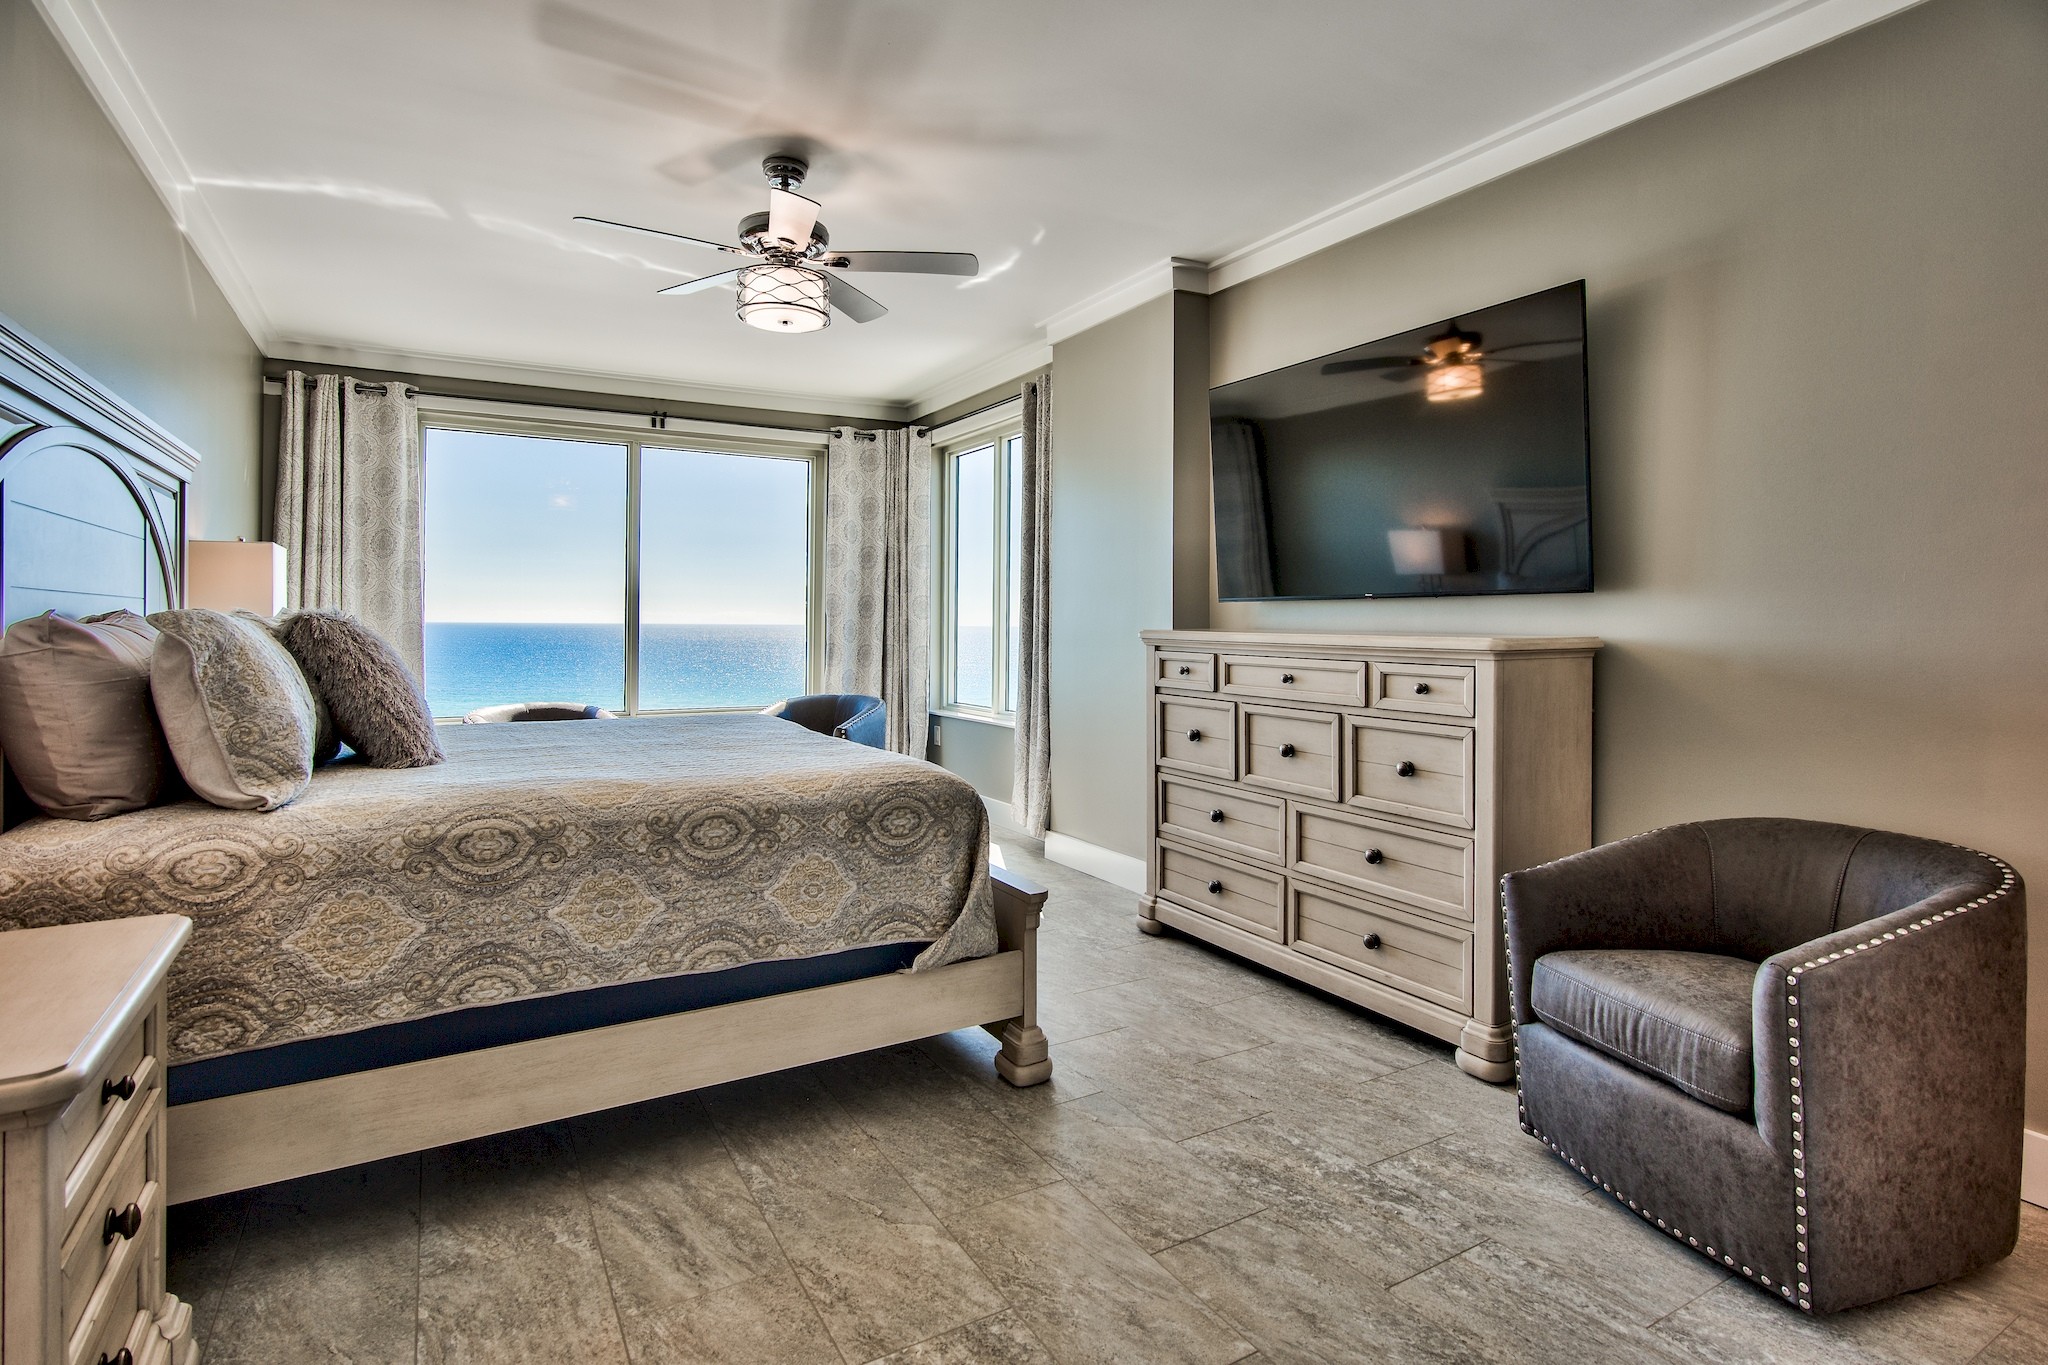 Master King Bedroom with a Gulf View and sitting area